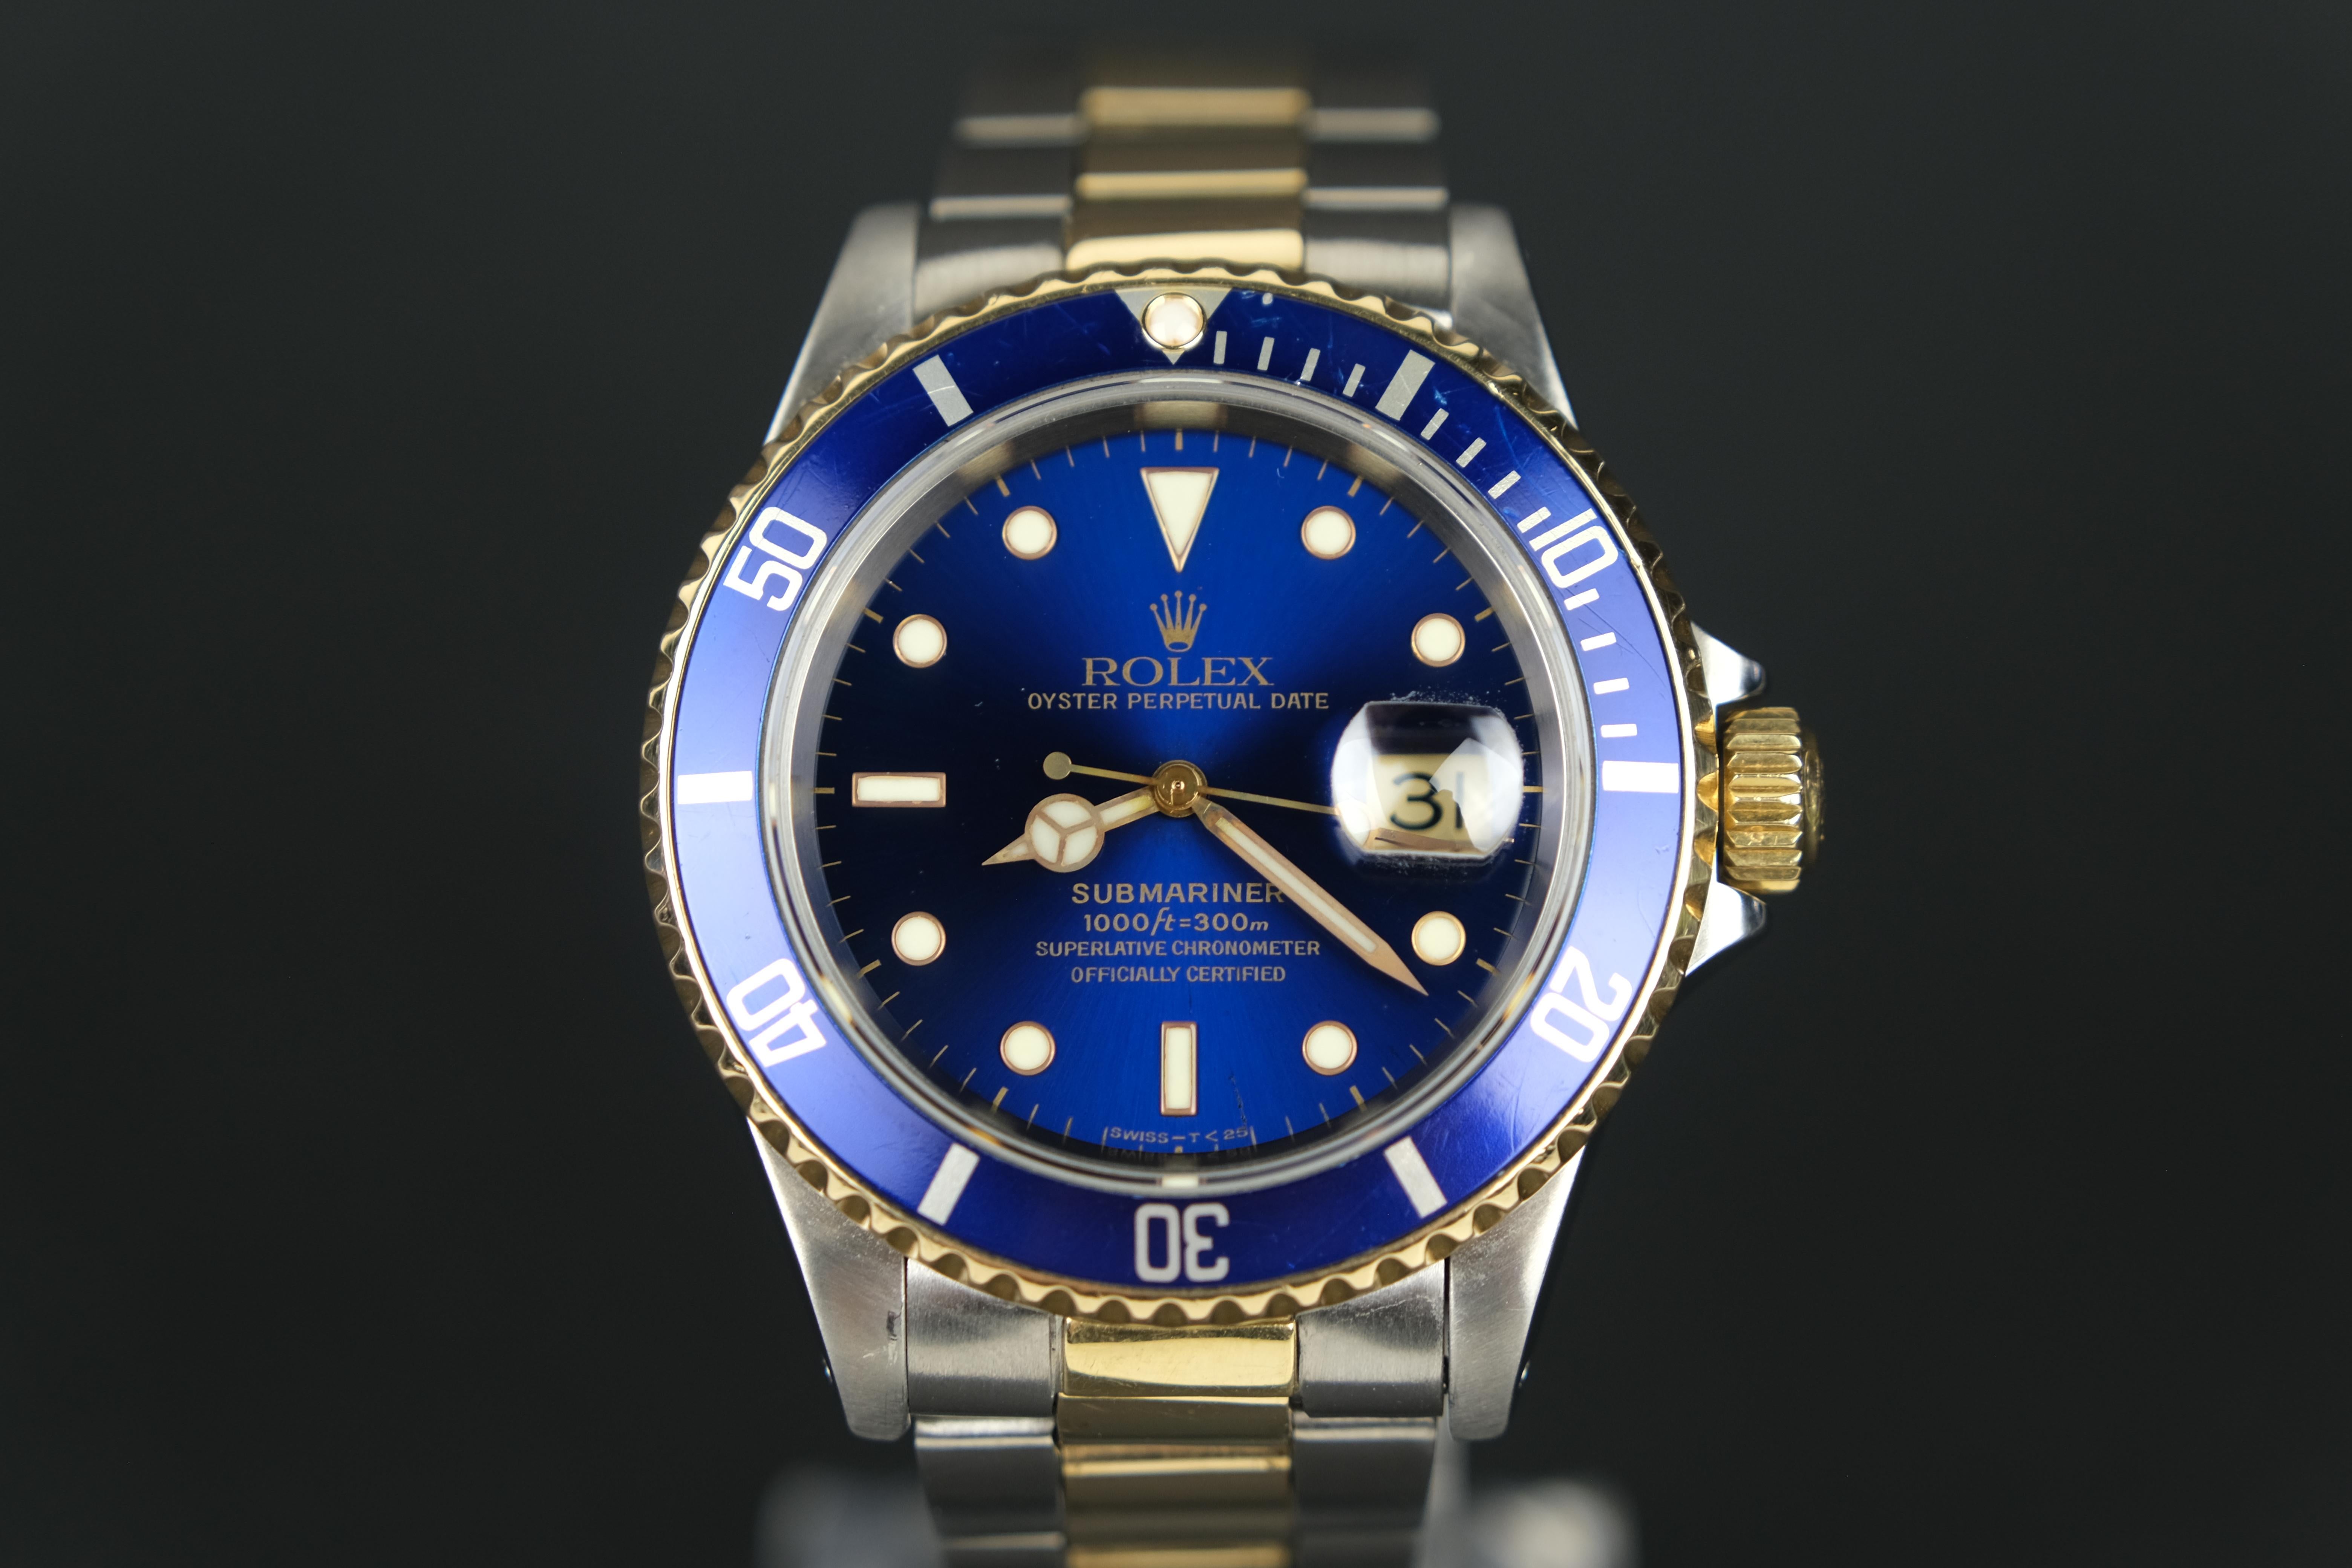 A 1997 Rolex Sabmariner Date 18K Gold and Stainless Steel automatic wristwatch. A classic watch that has the heritage of being a divers watch and the history of the Oyster Perpetual that combines to create a watch with an 18K yellow gold